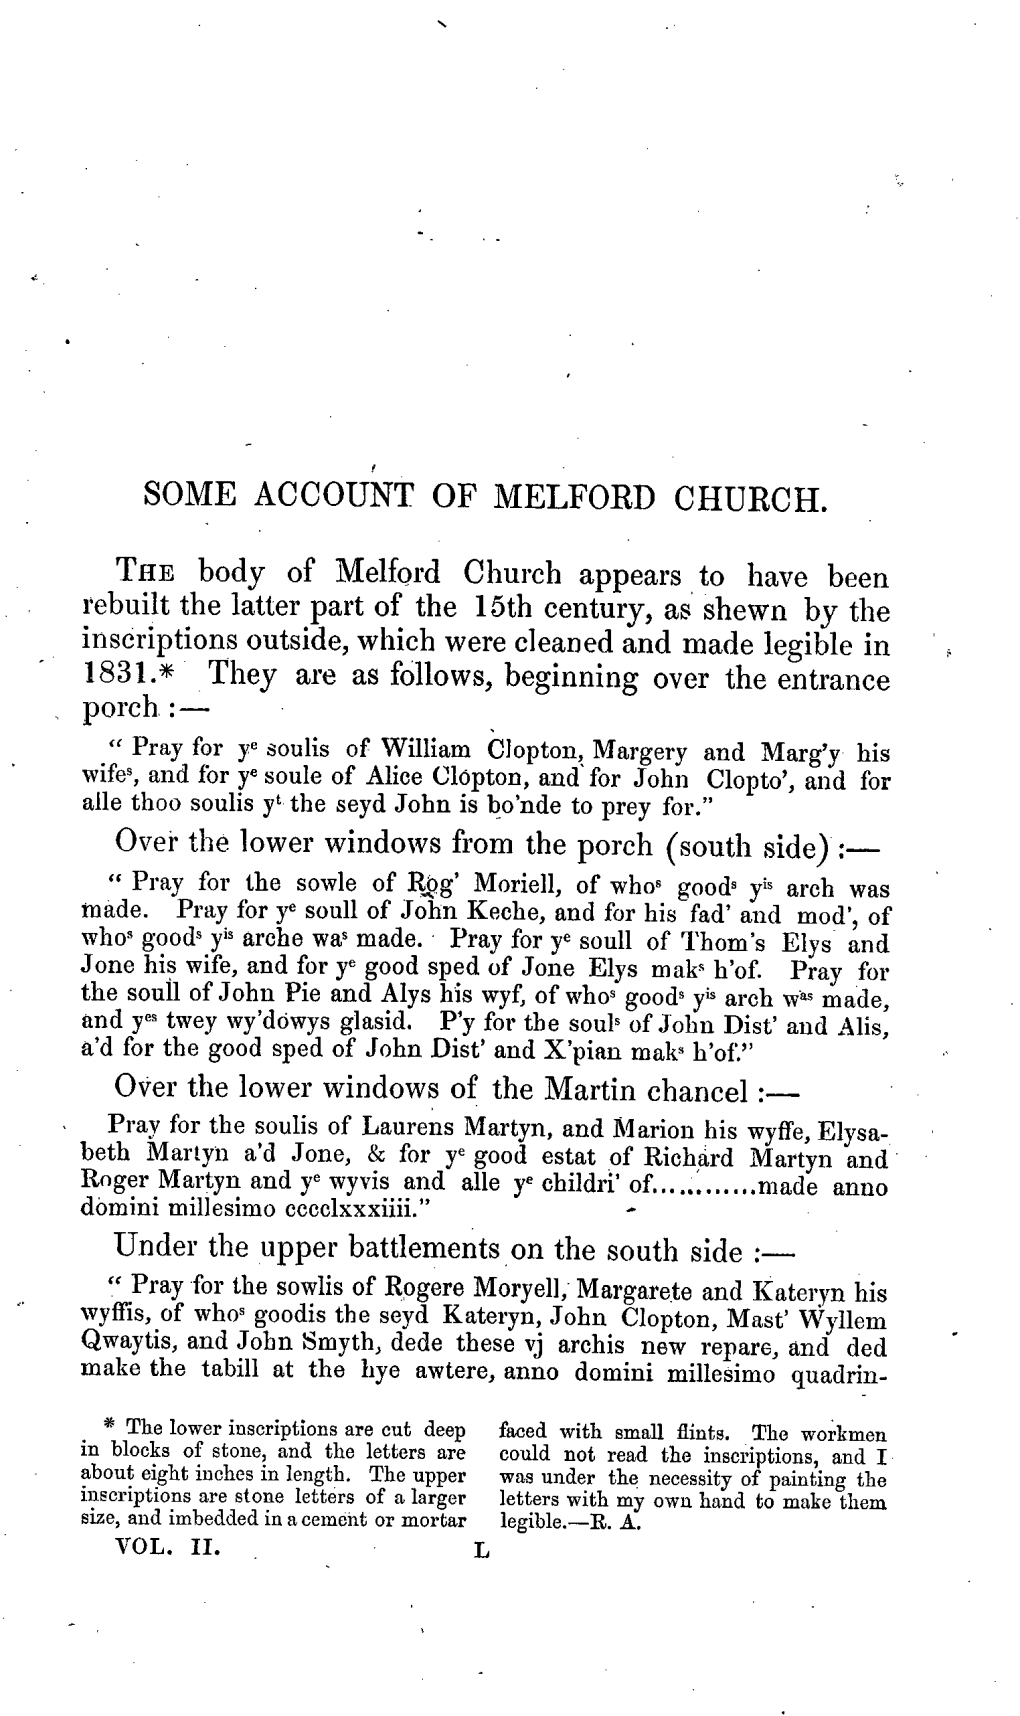 Some Account of Melford Church